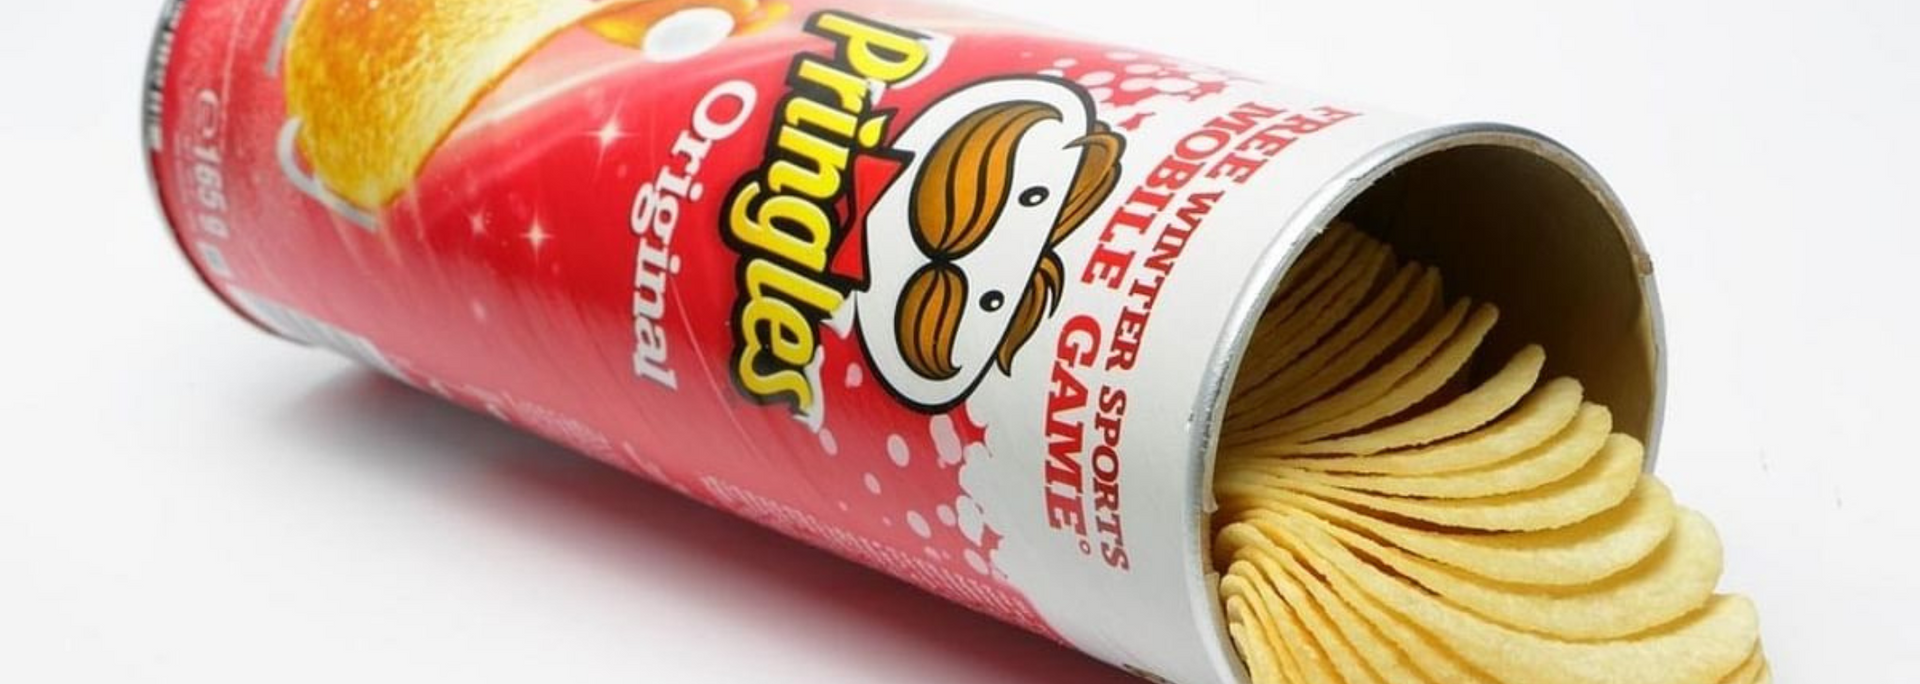 Picture of a Pringles tube.
